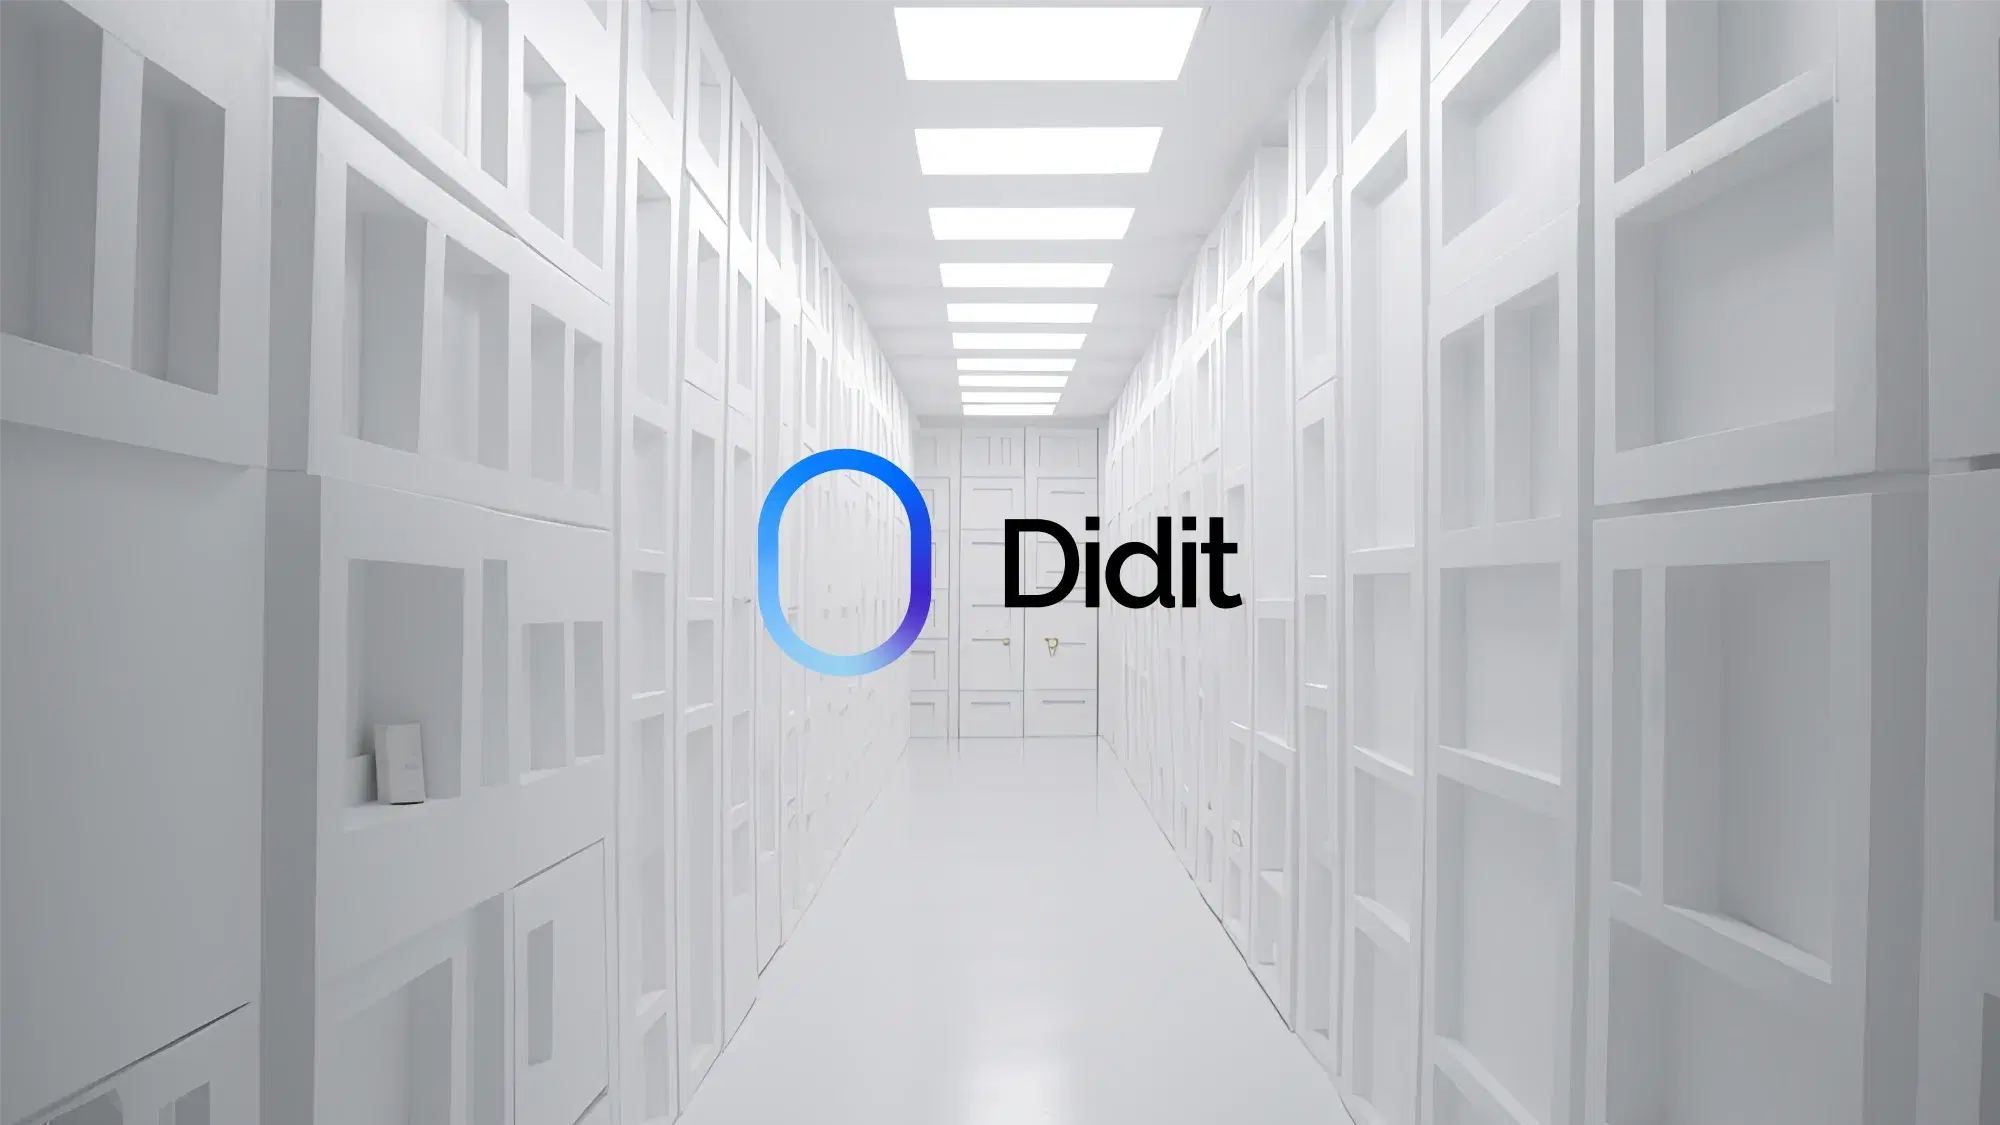 All your essentials in one place, organized, secure, and private with Didit